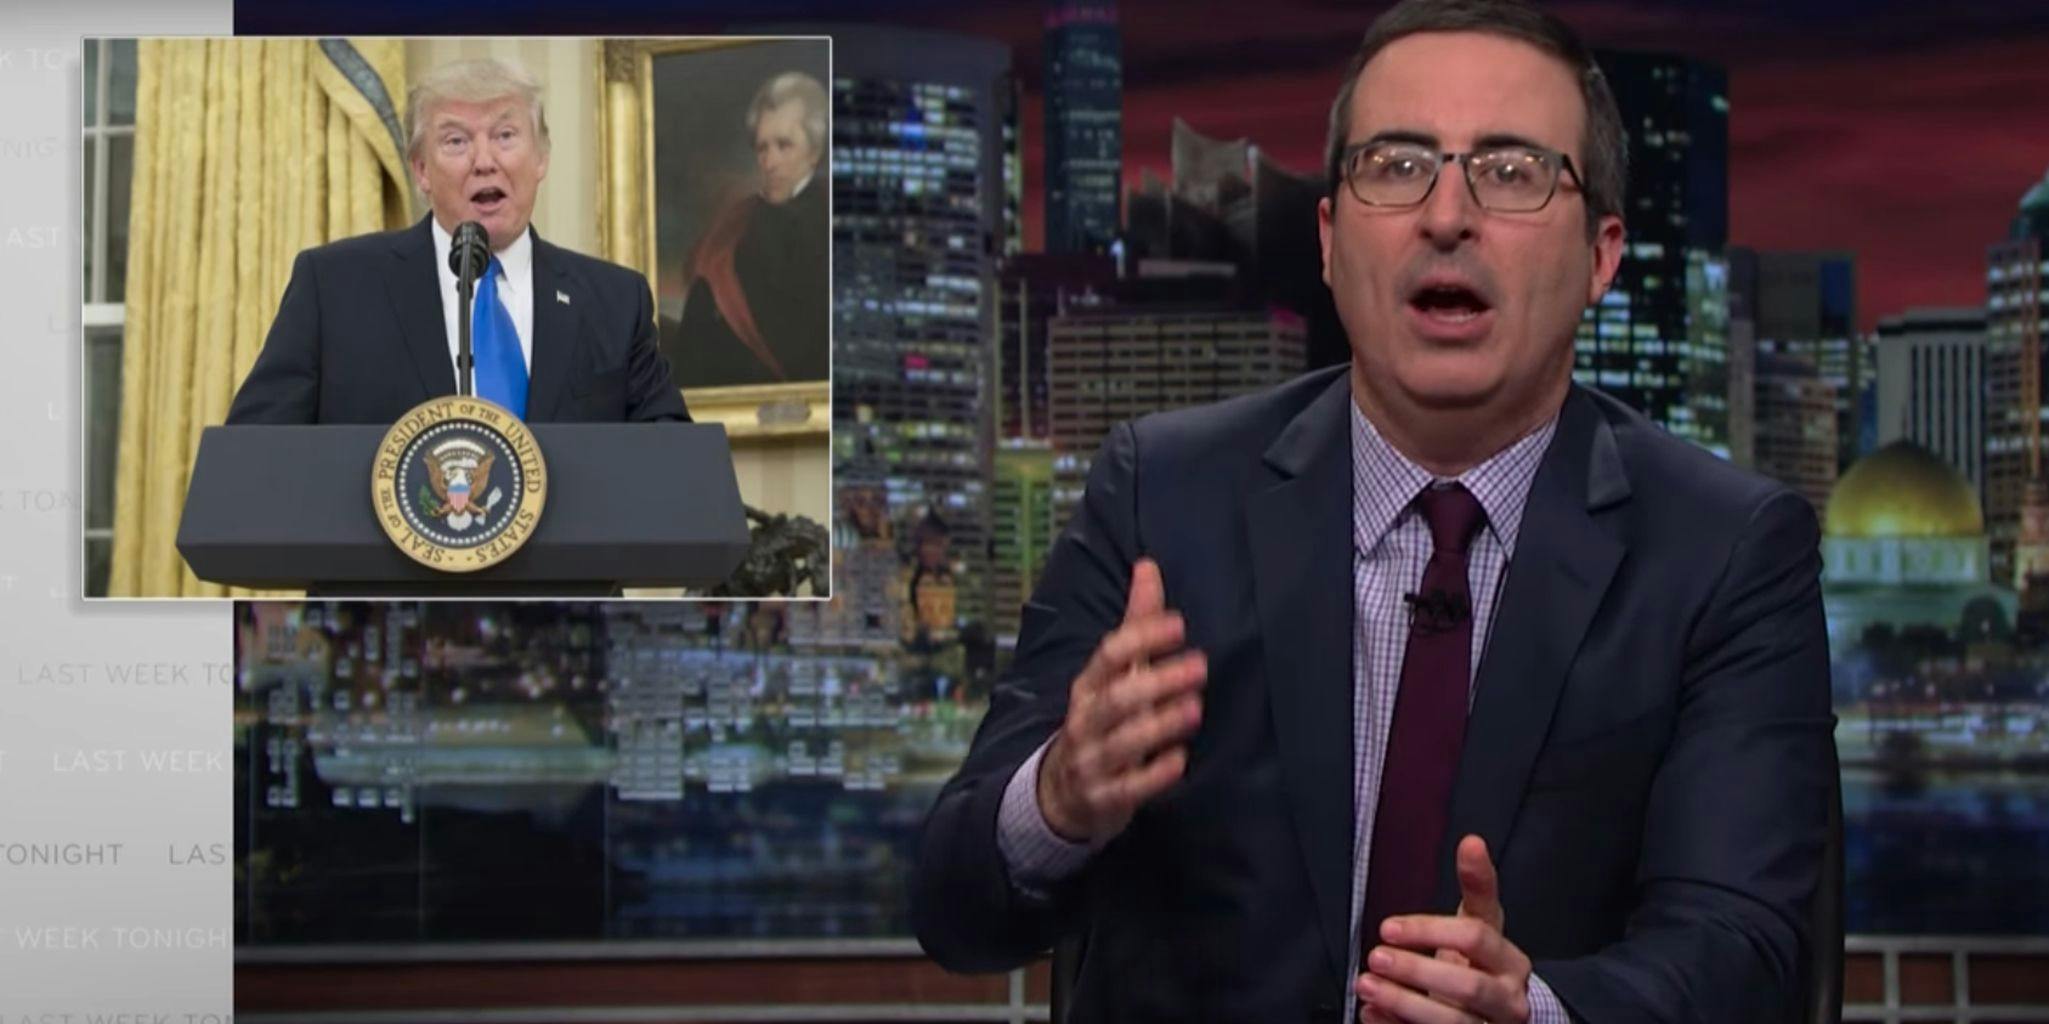 John Oliver Returns to Answer 4 Questions About Trump's Trouble With